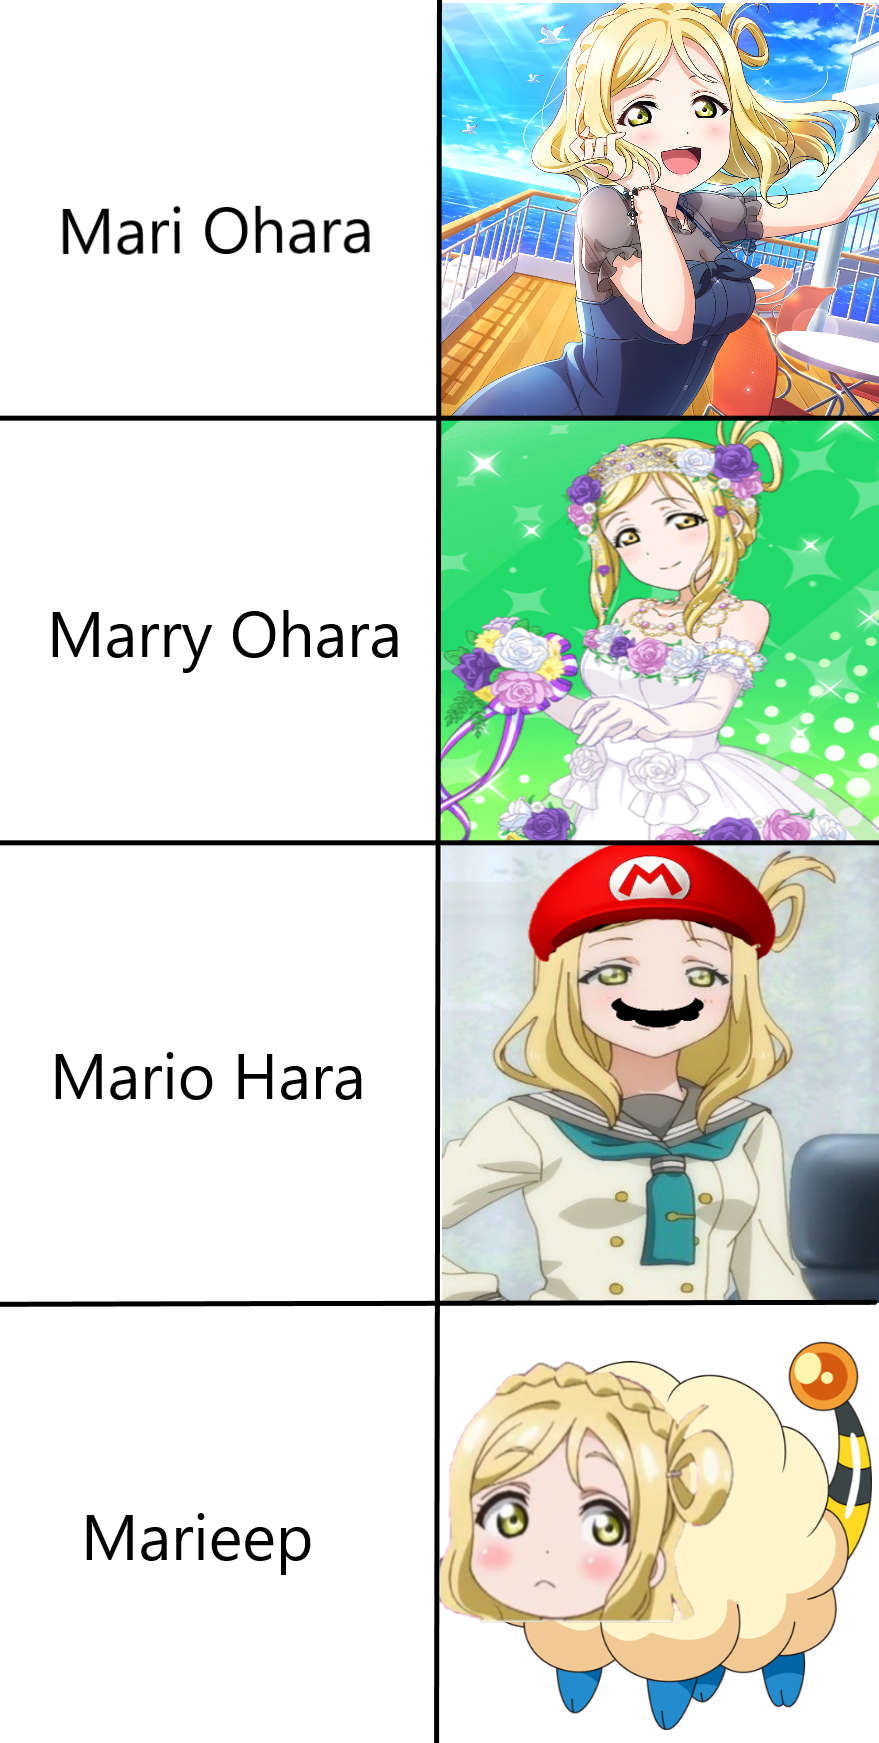 Meme I made depicting the many forms of our shiny goddess :3